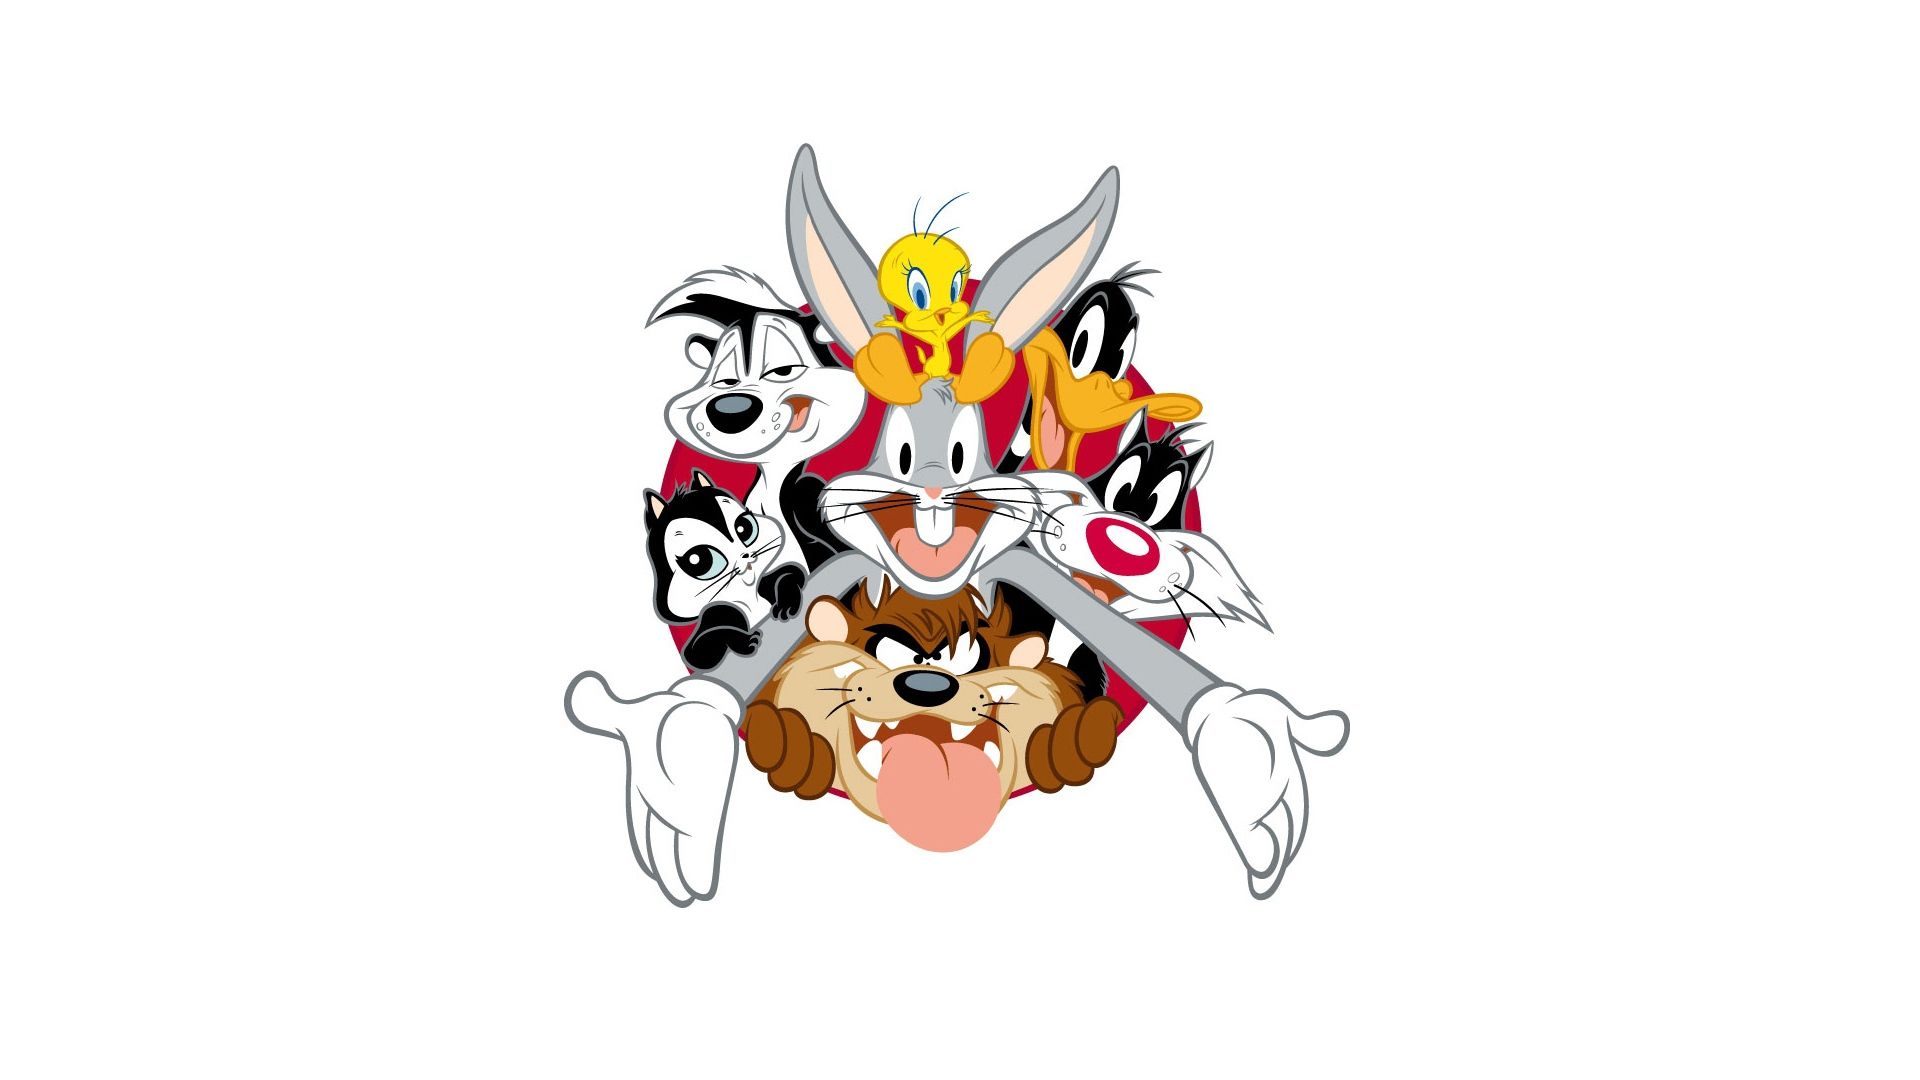 Looney Tunes hd wallpaper for laptop